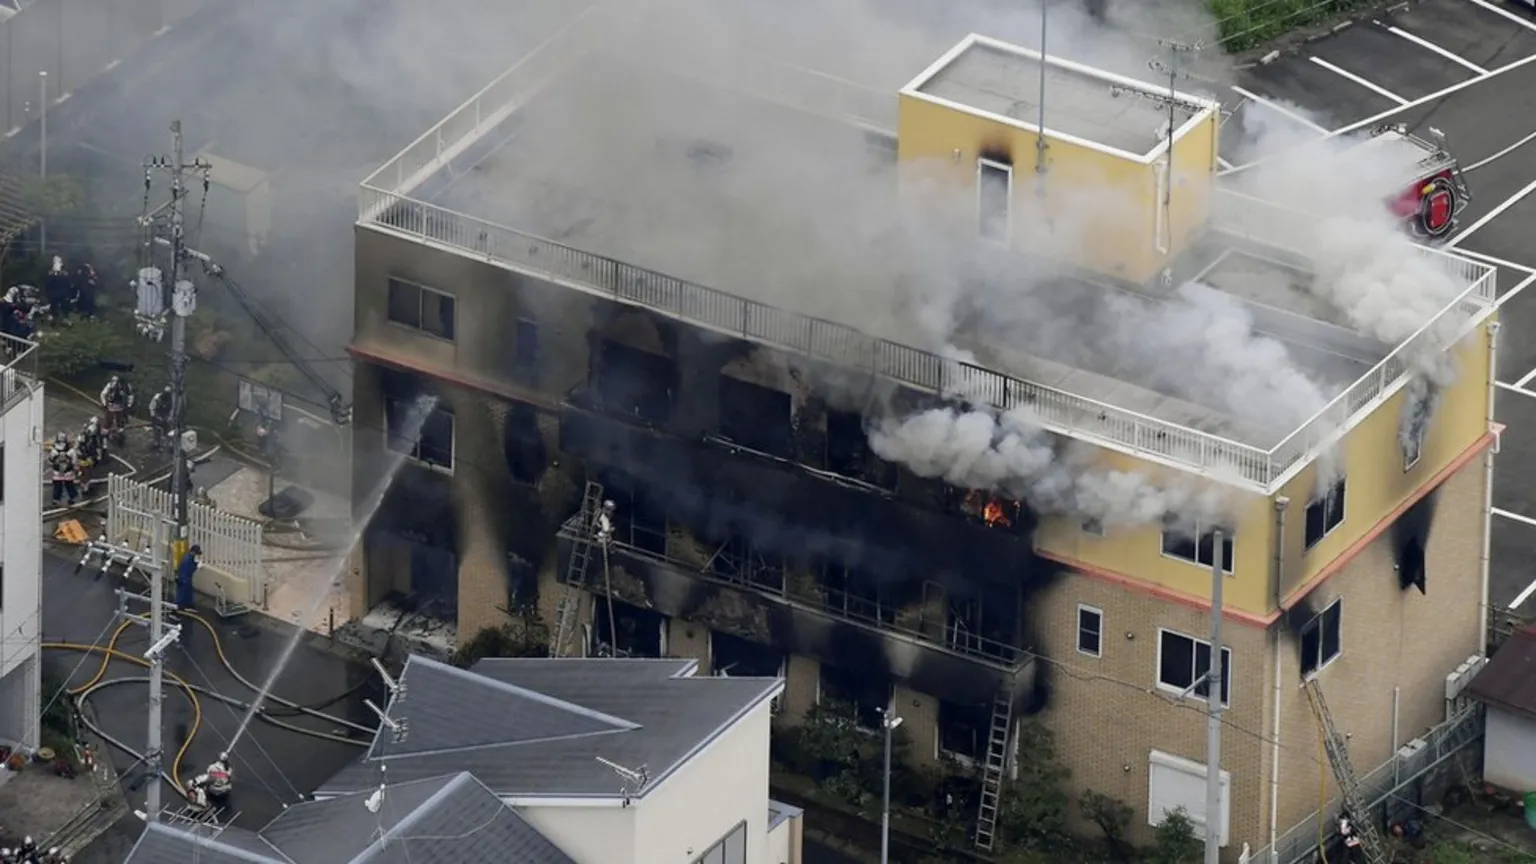 Man sentenced to death for Kyoto anime fire which killed 36 (bbc.com)